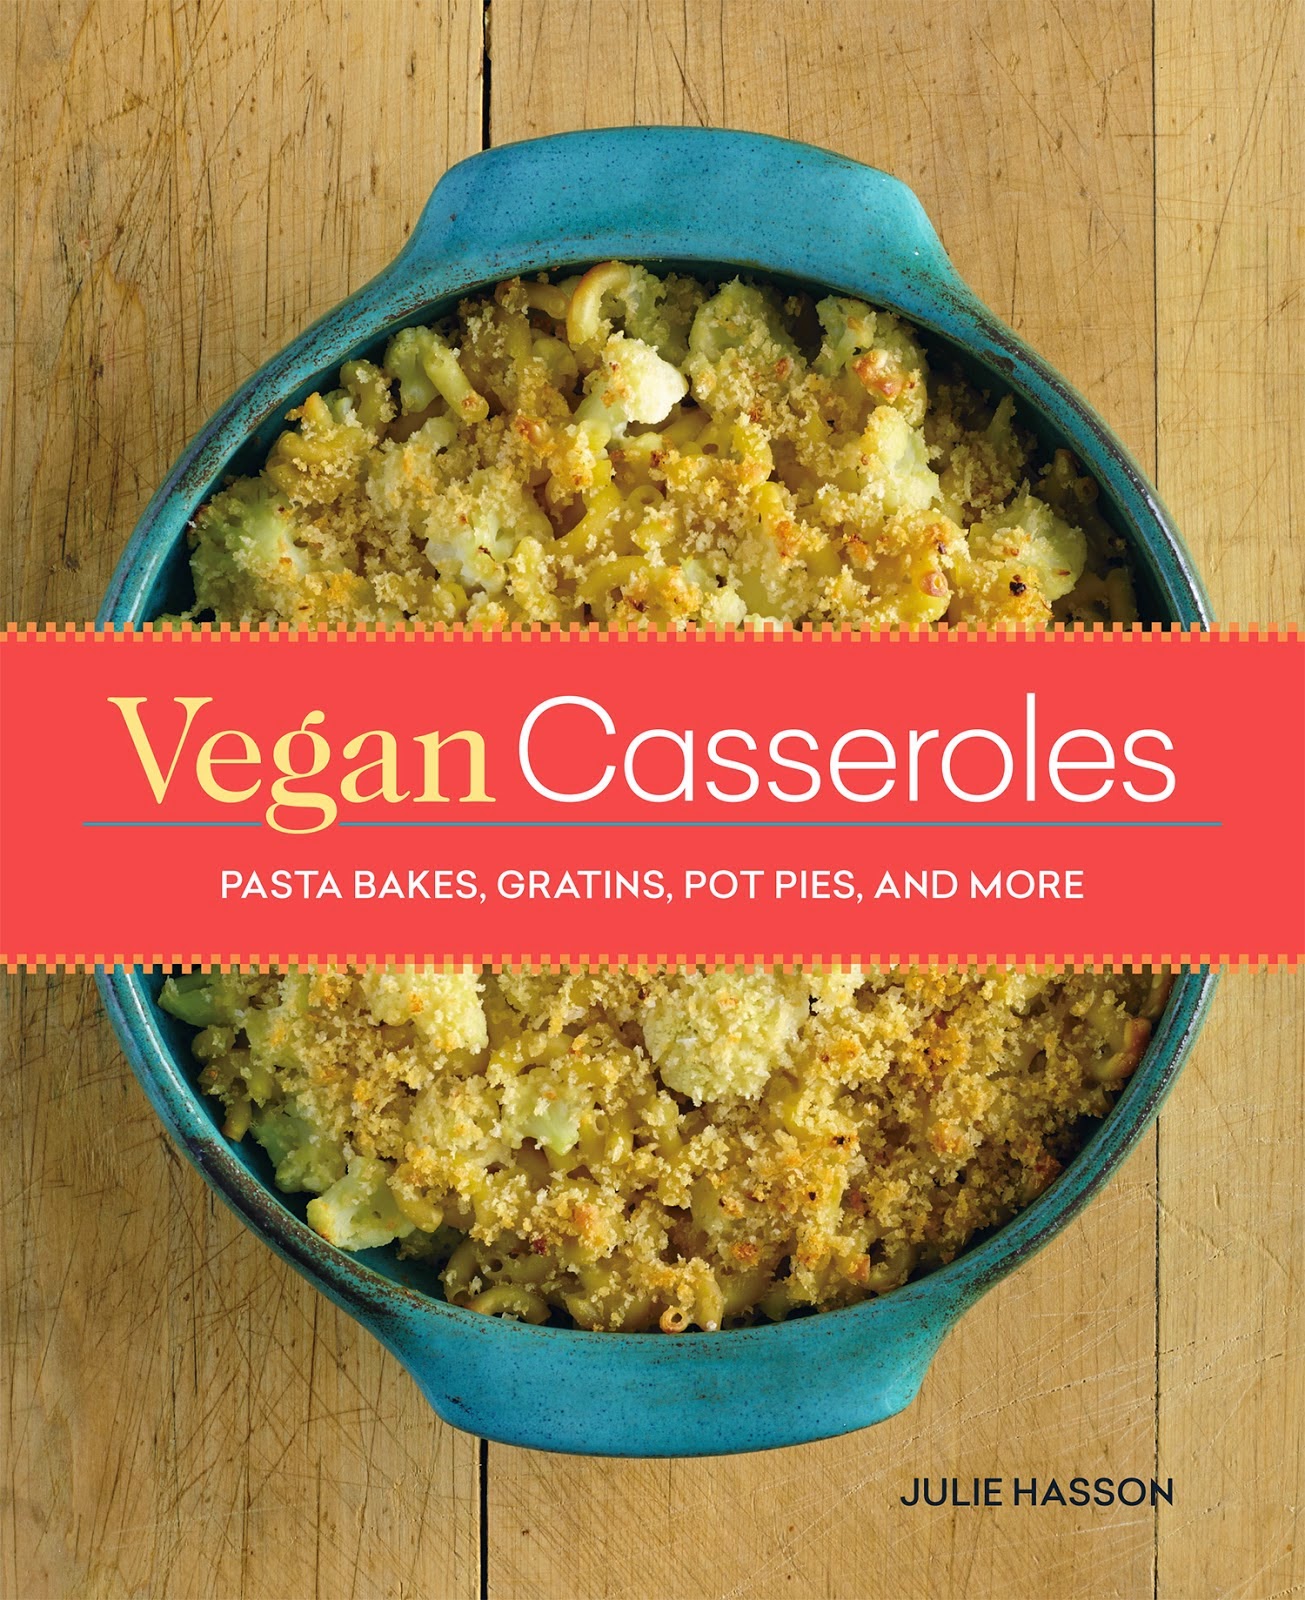 Vegan Casseroles Review and Giveaway